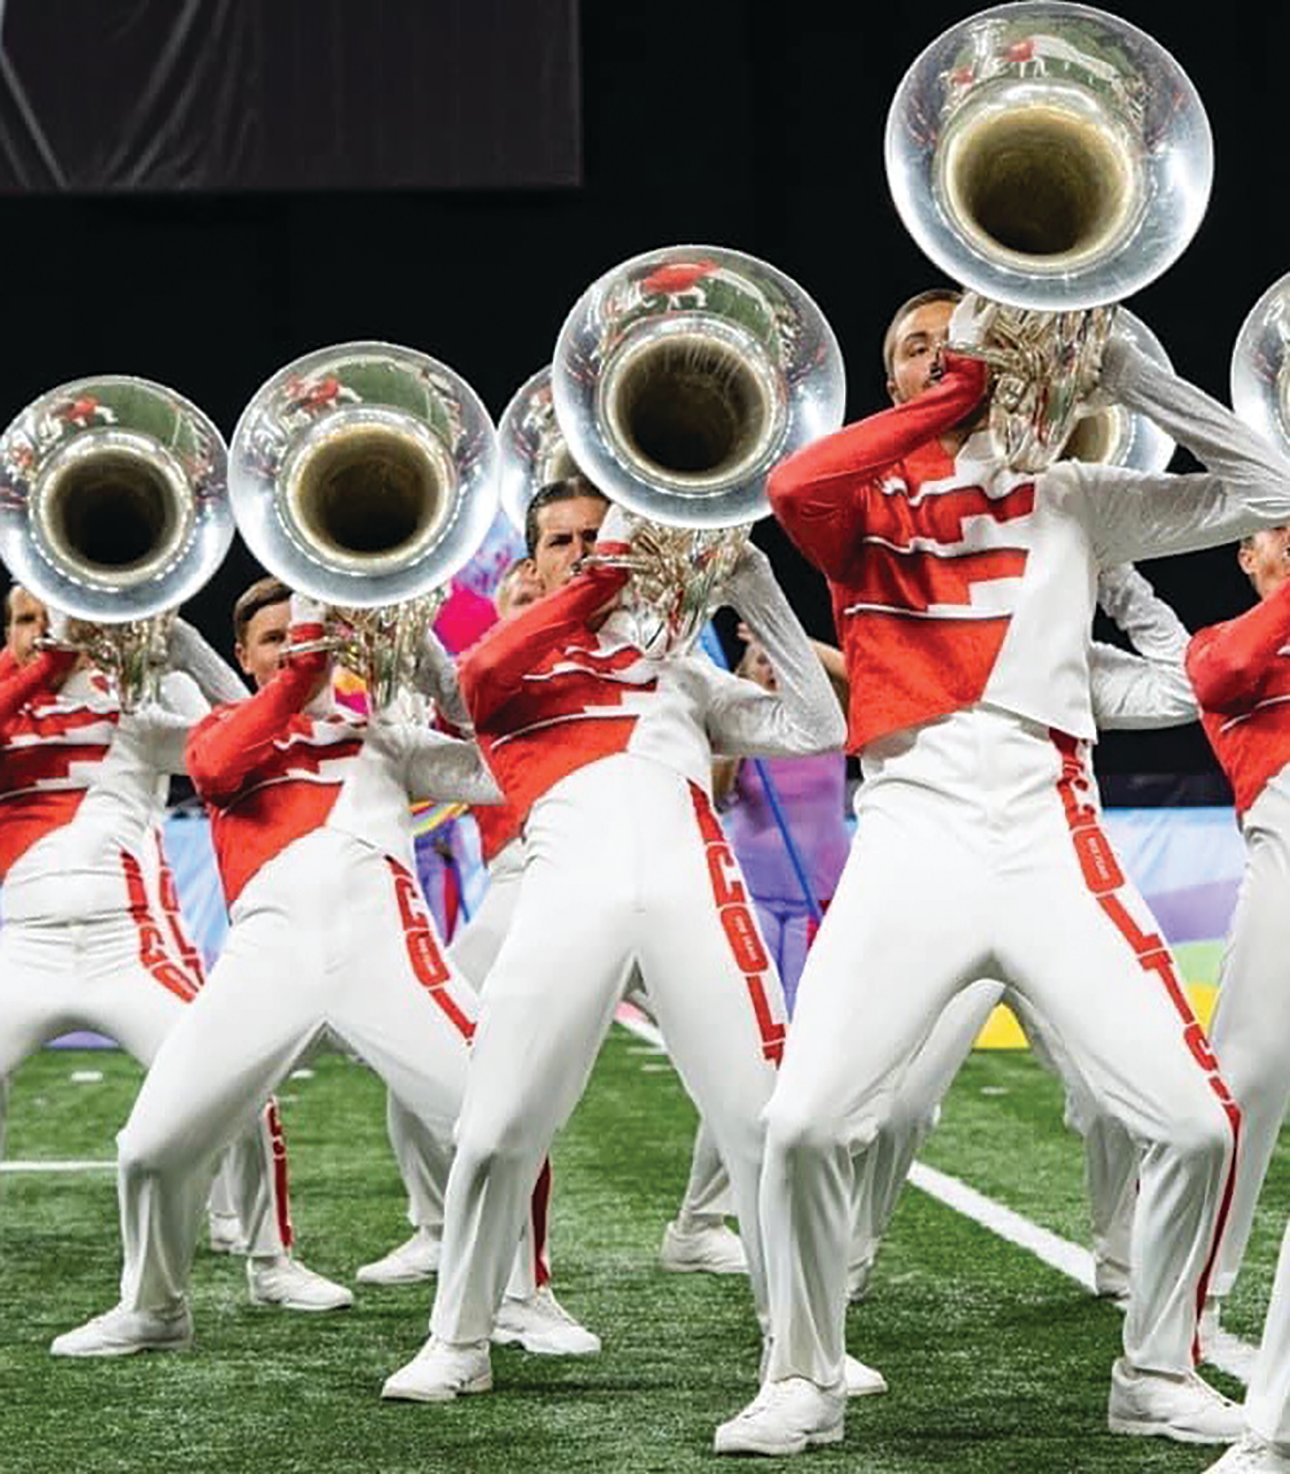 Baker (center) has been active in drum corps with the group the Colts since 2018.